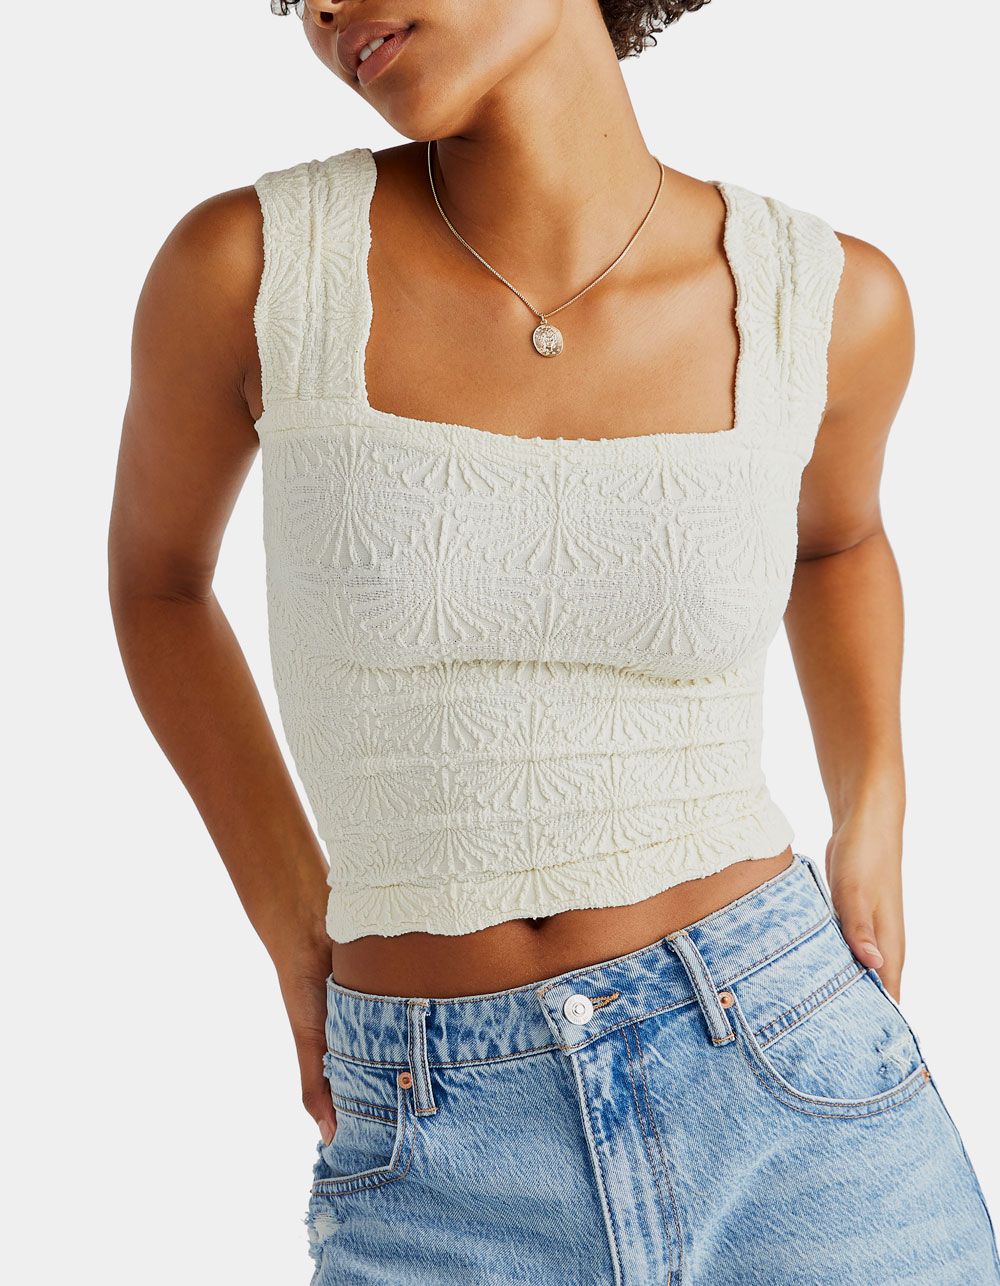 Free People Love Letter Cami - Pink Cami Top - Textured Tank Top